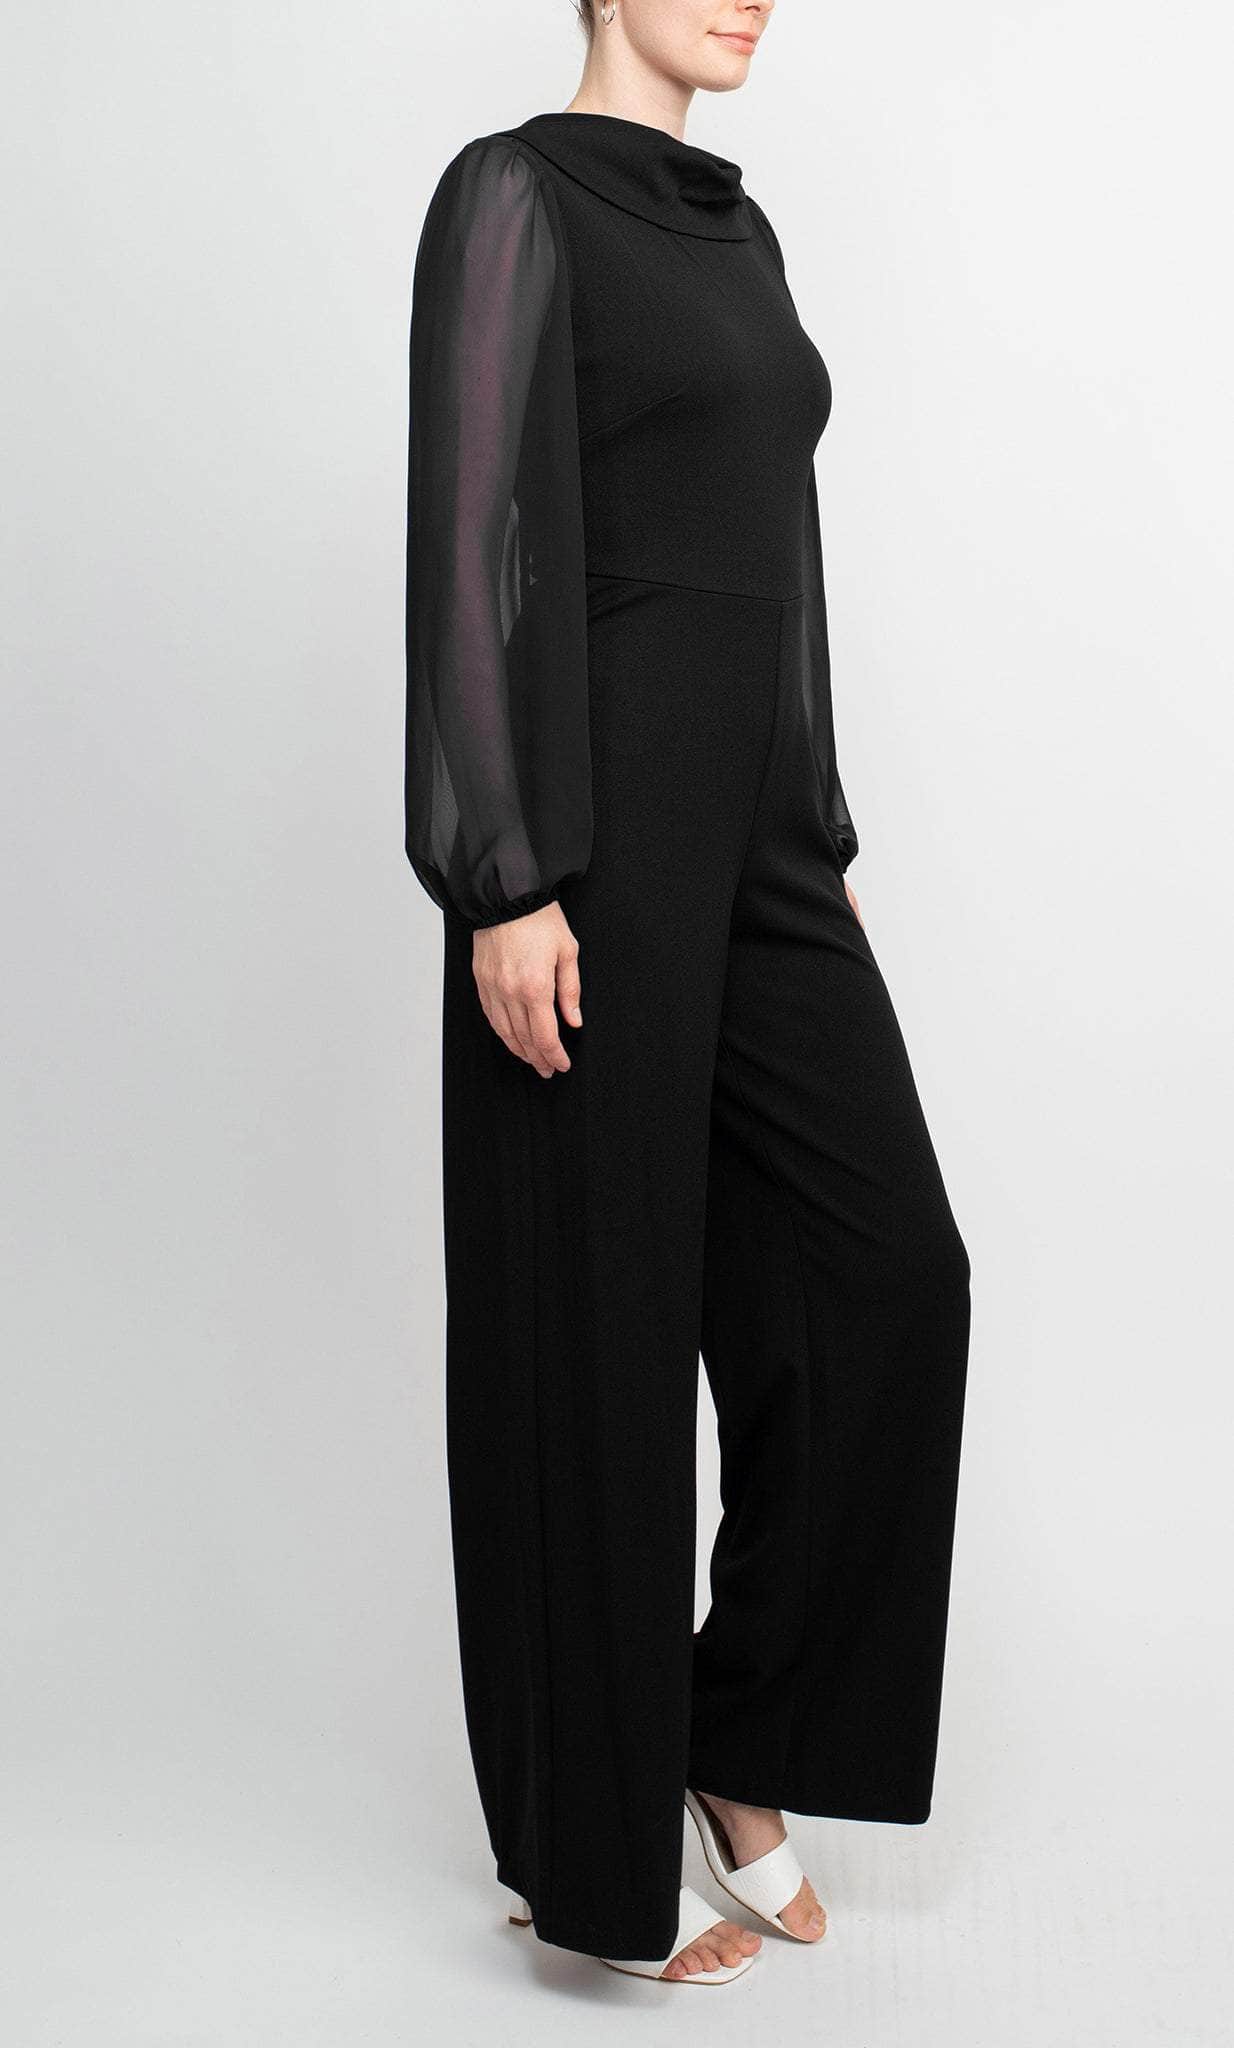 Connected Apparel TJE48312M1 - Sheer Bell Sleeve Jumpsuit Formal Pantsuits